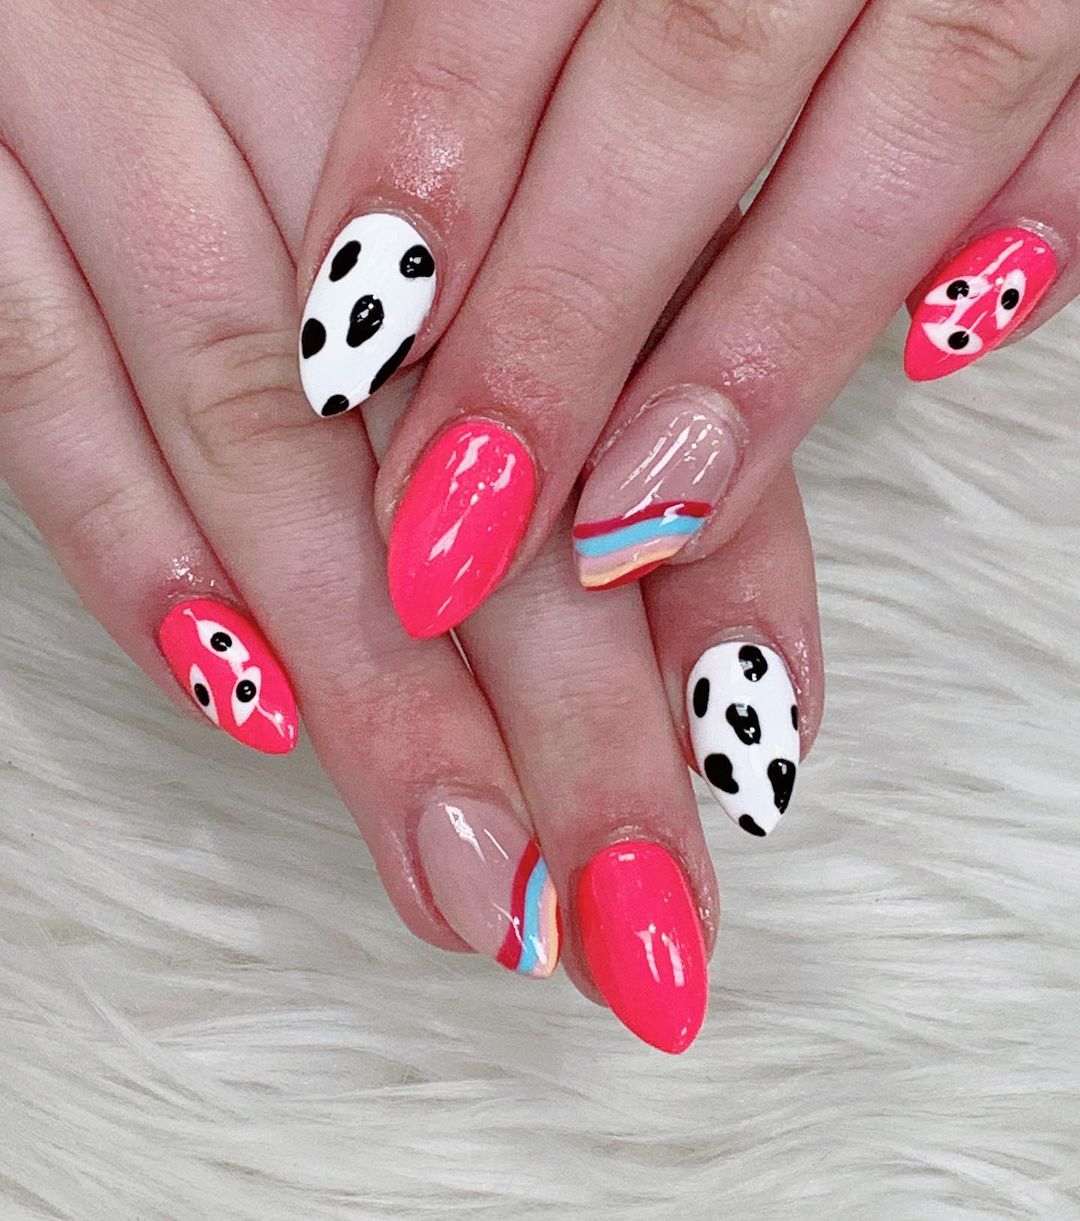 35 Short Nails Ideas and Designs